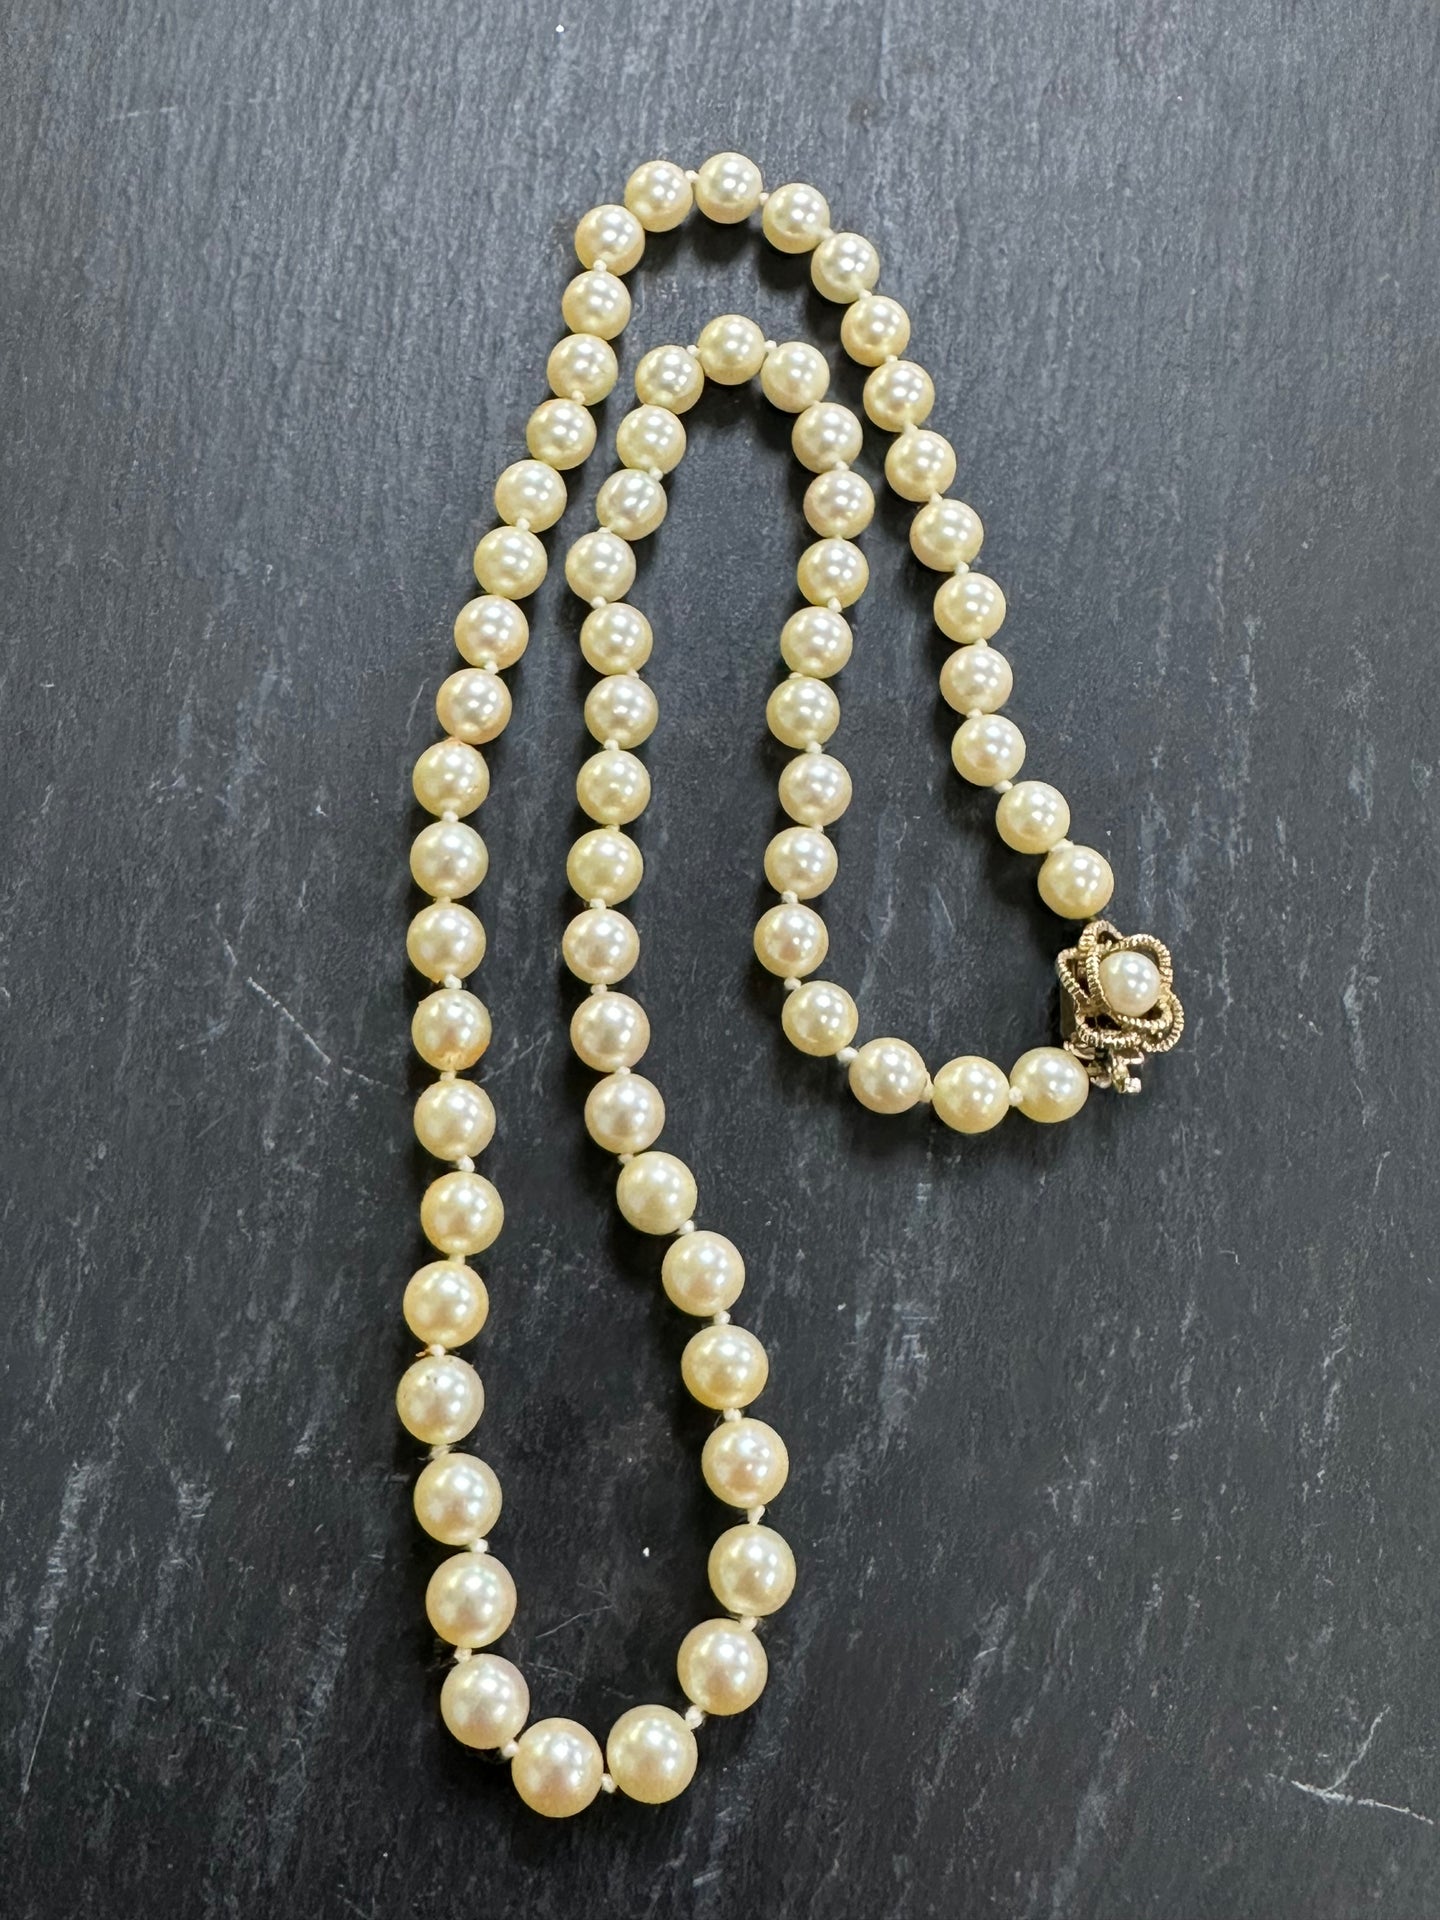 Preloved 6mm Cultured Pearl Necklace